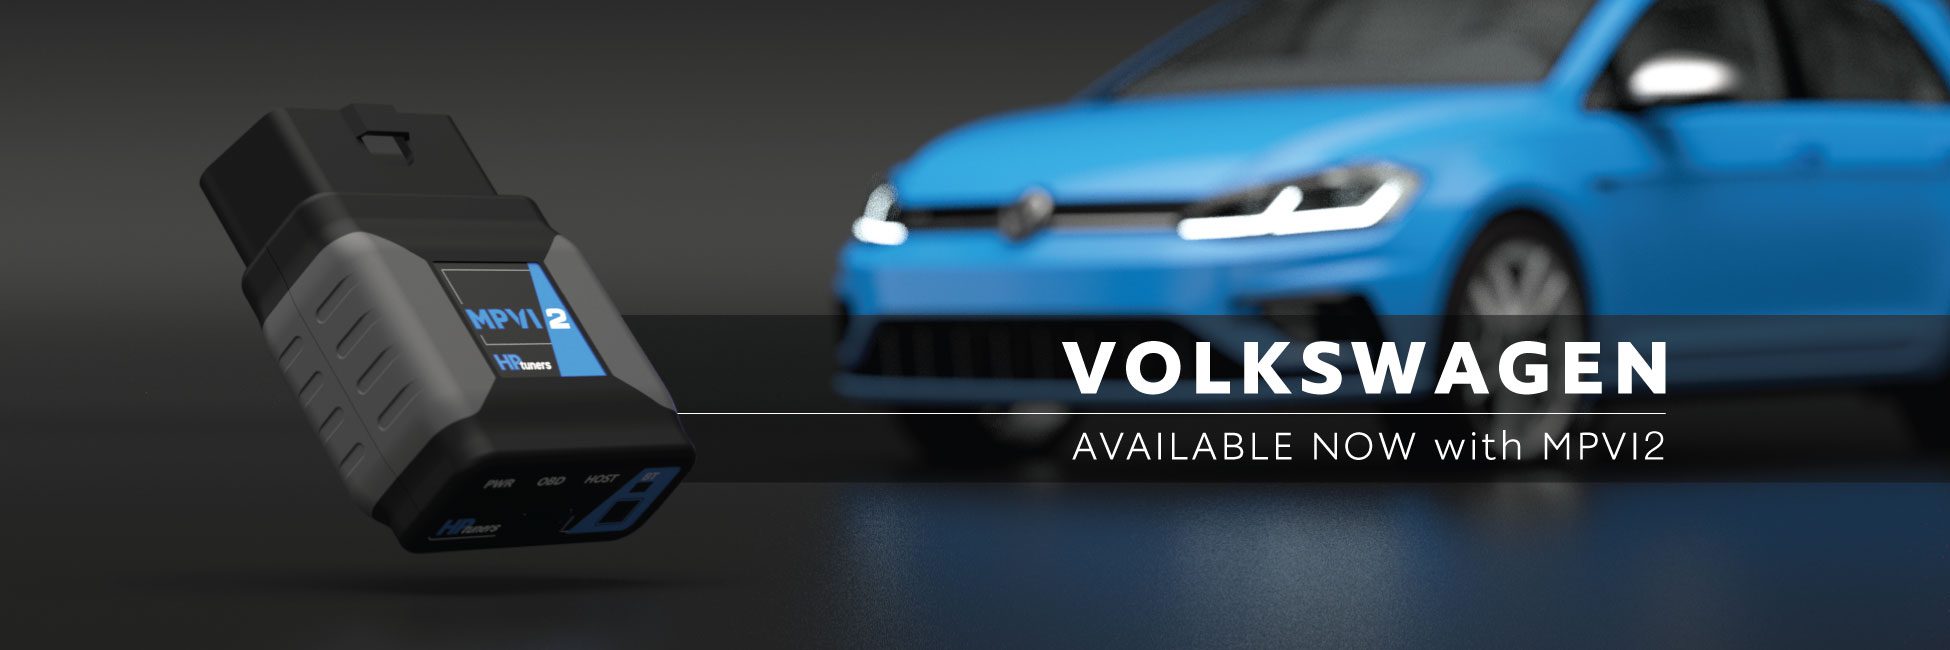 Volkswagen Support Now Available